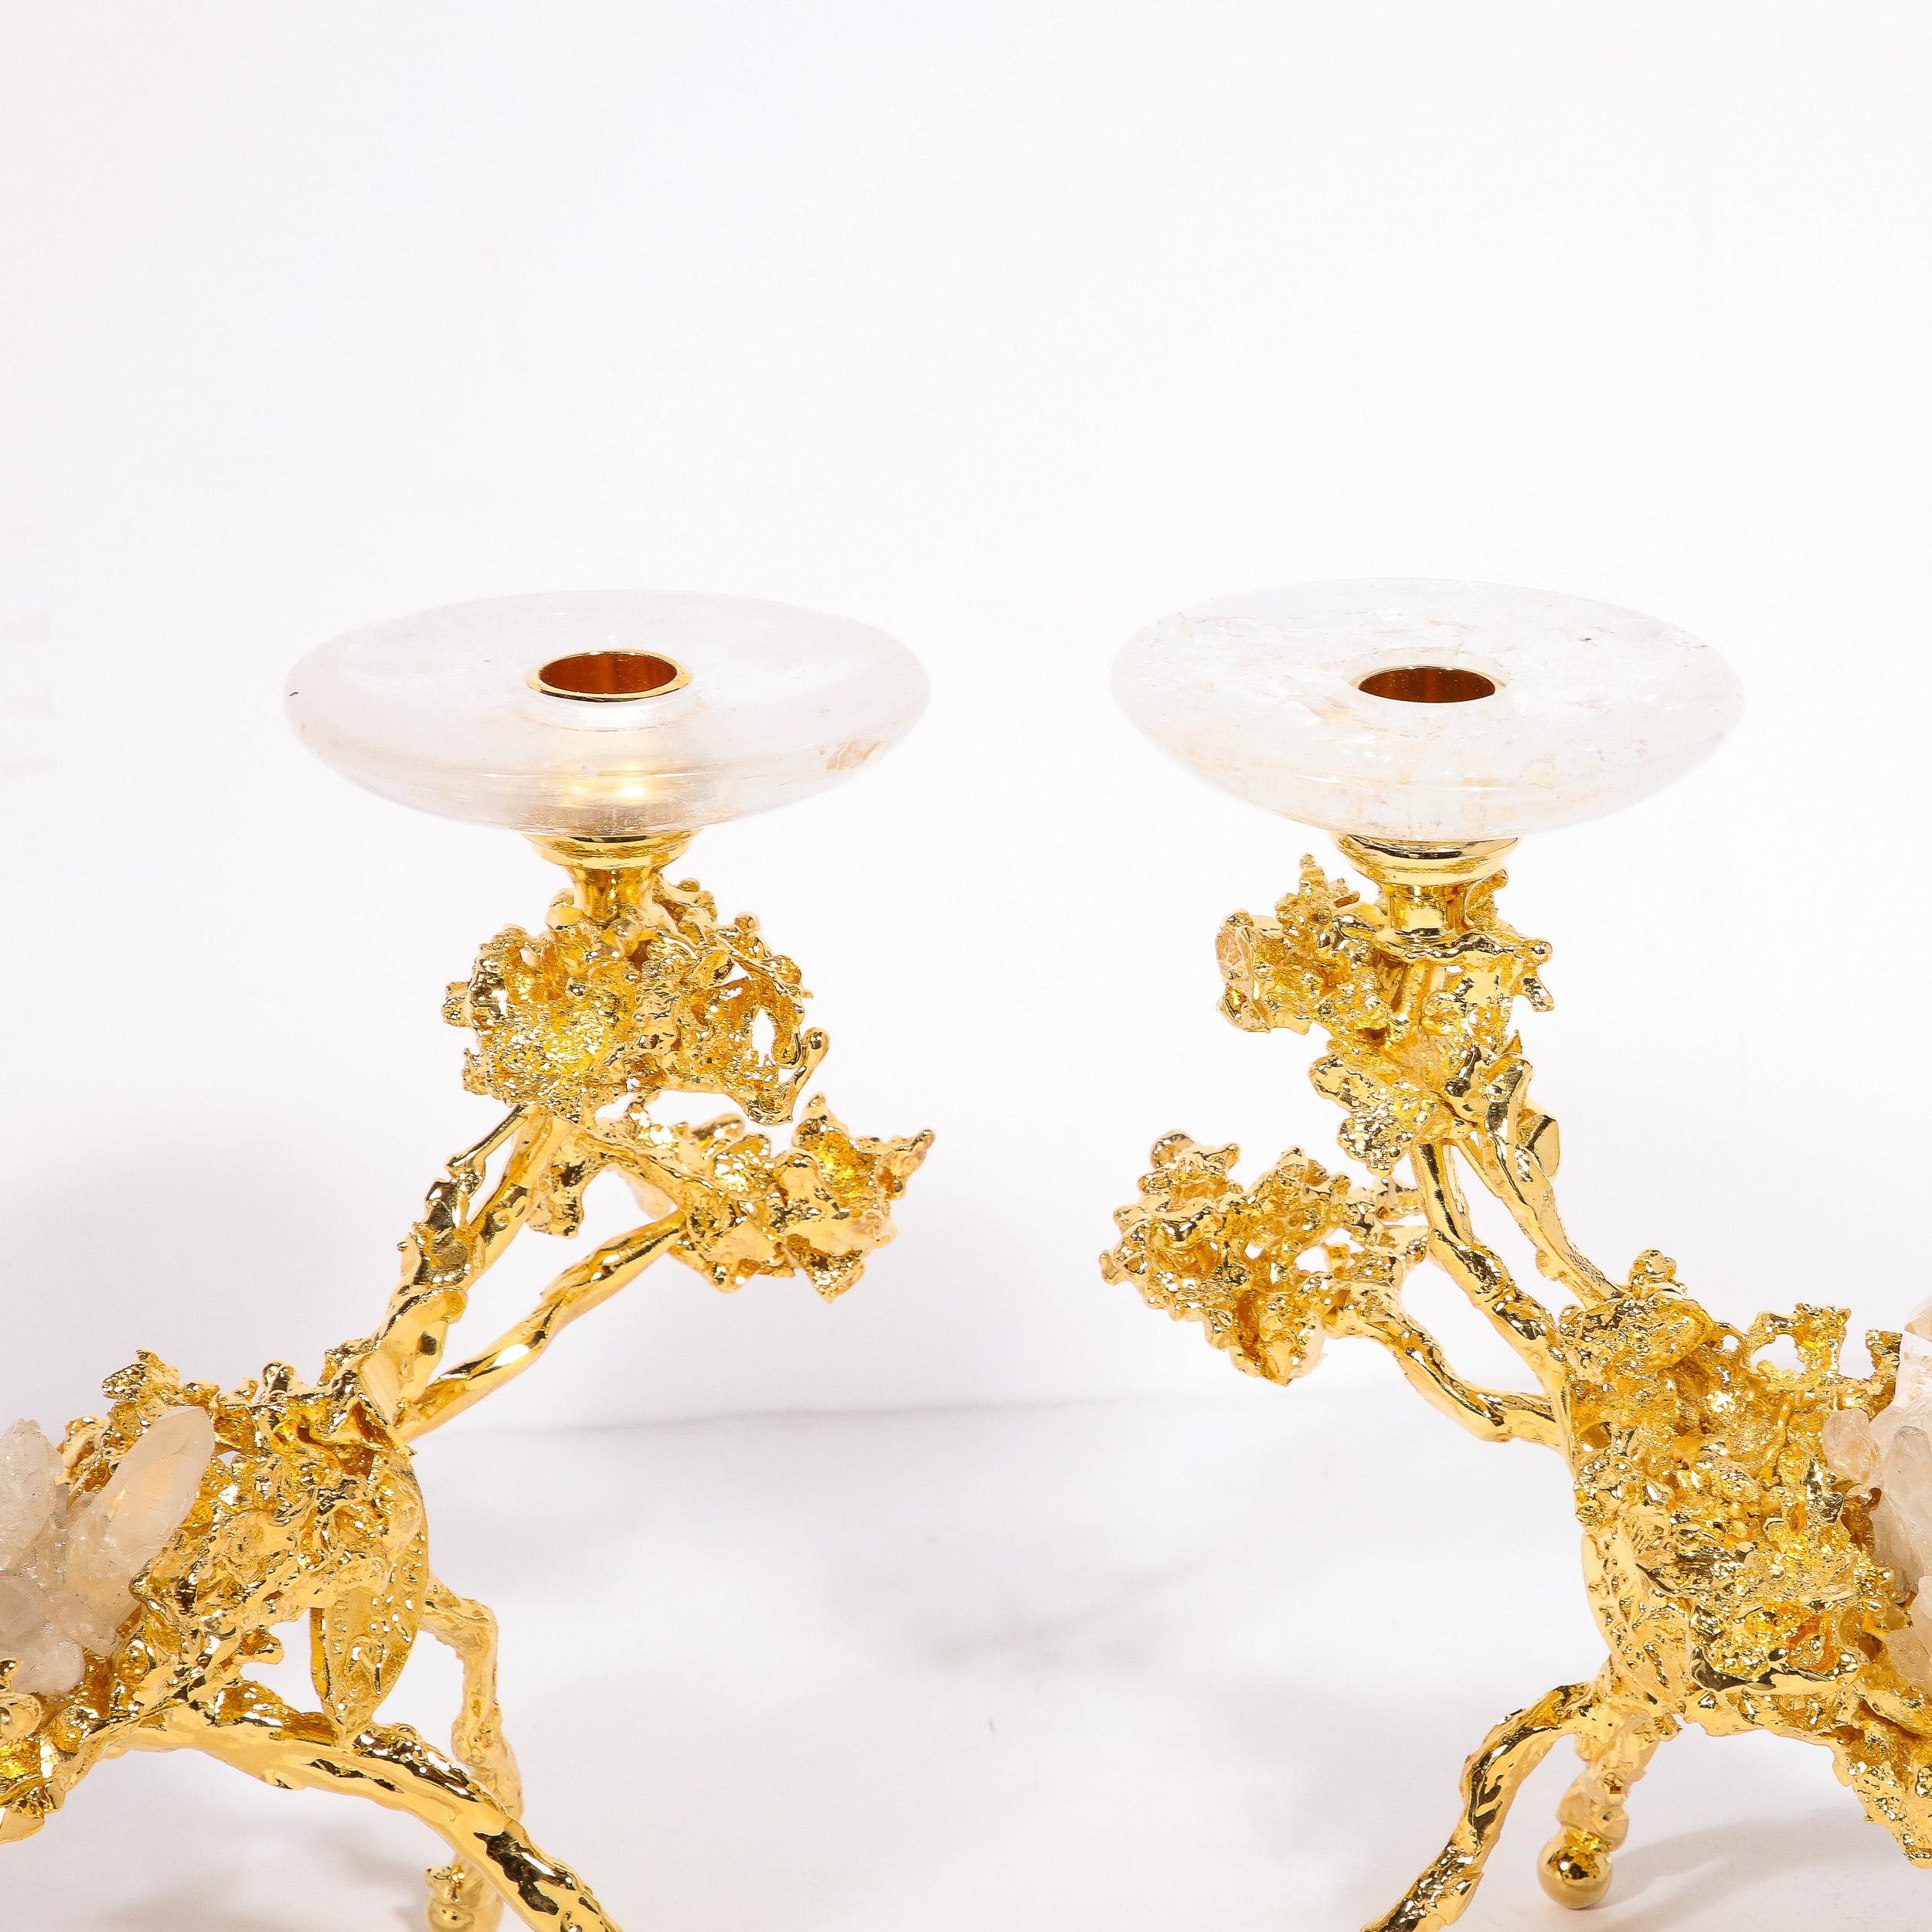 Pair of 24Karat Gold Low Branch Candleholders w/ Rock Crystals by Claude Boeltz For Sale 4